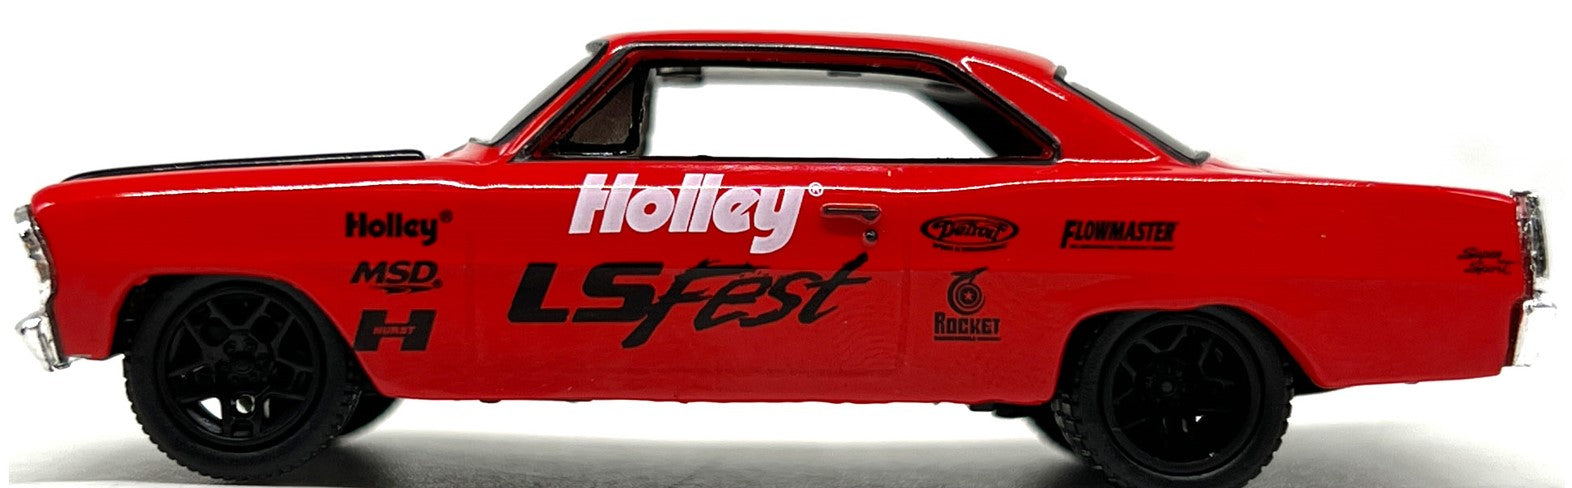 Holley Model Vehicle 31600-LSFEST